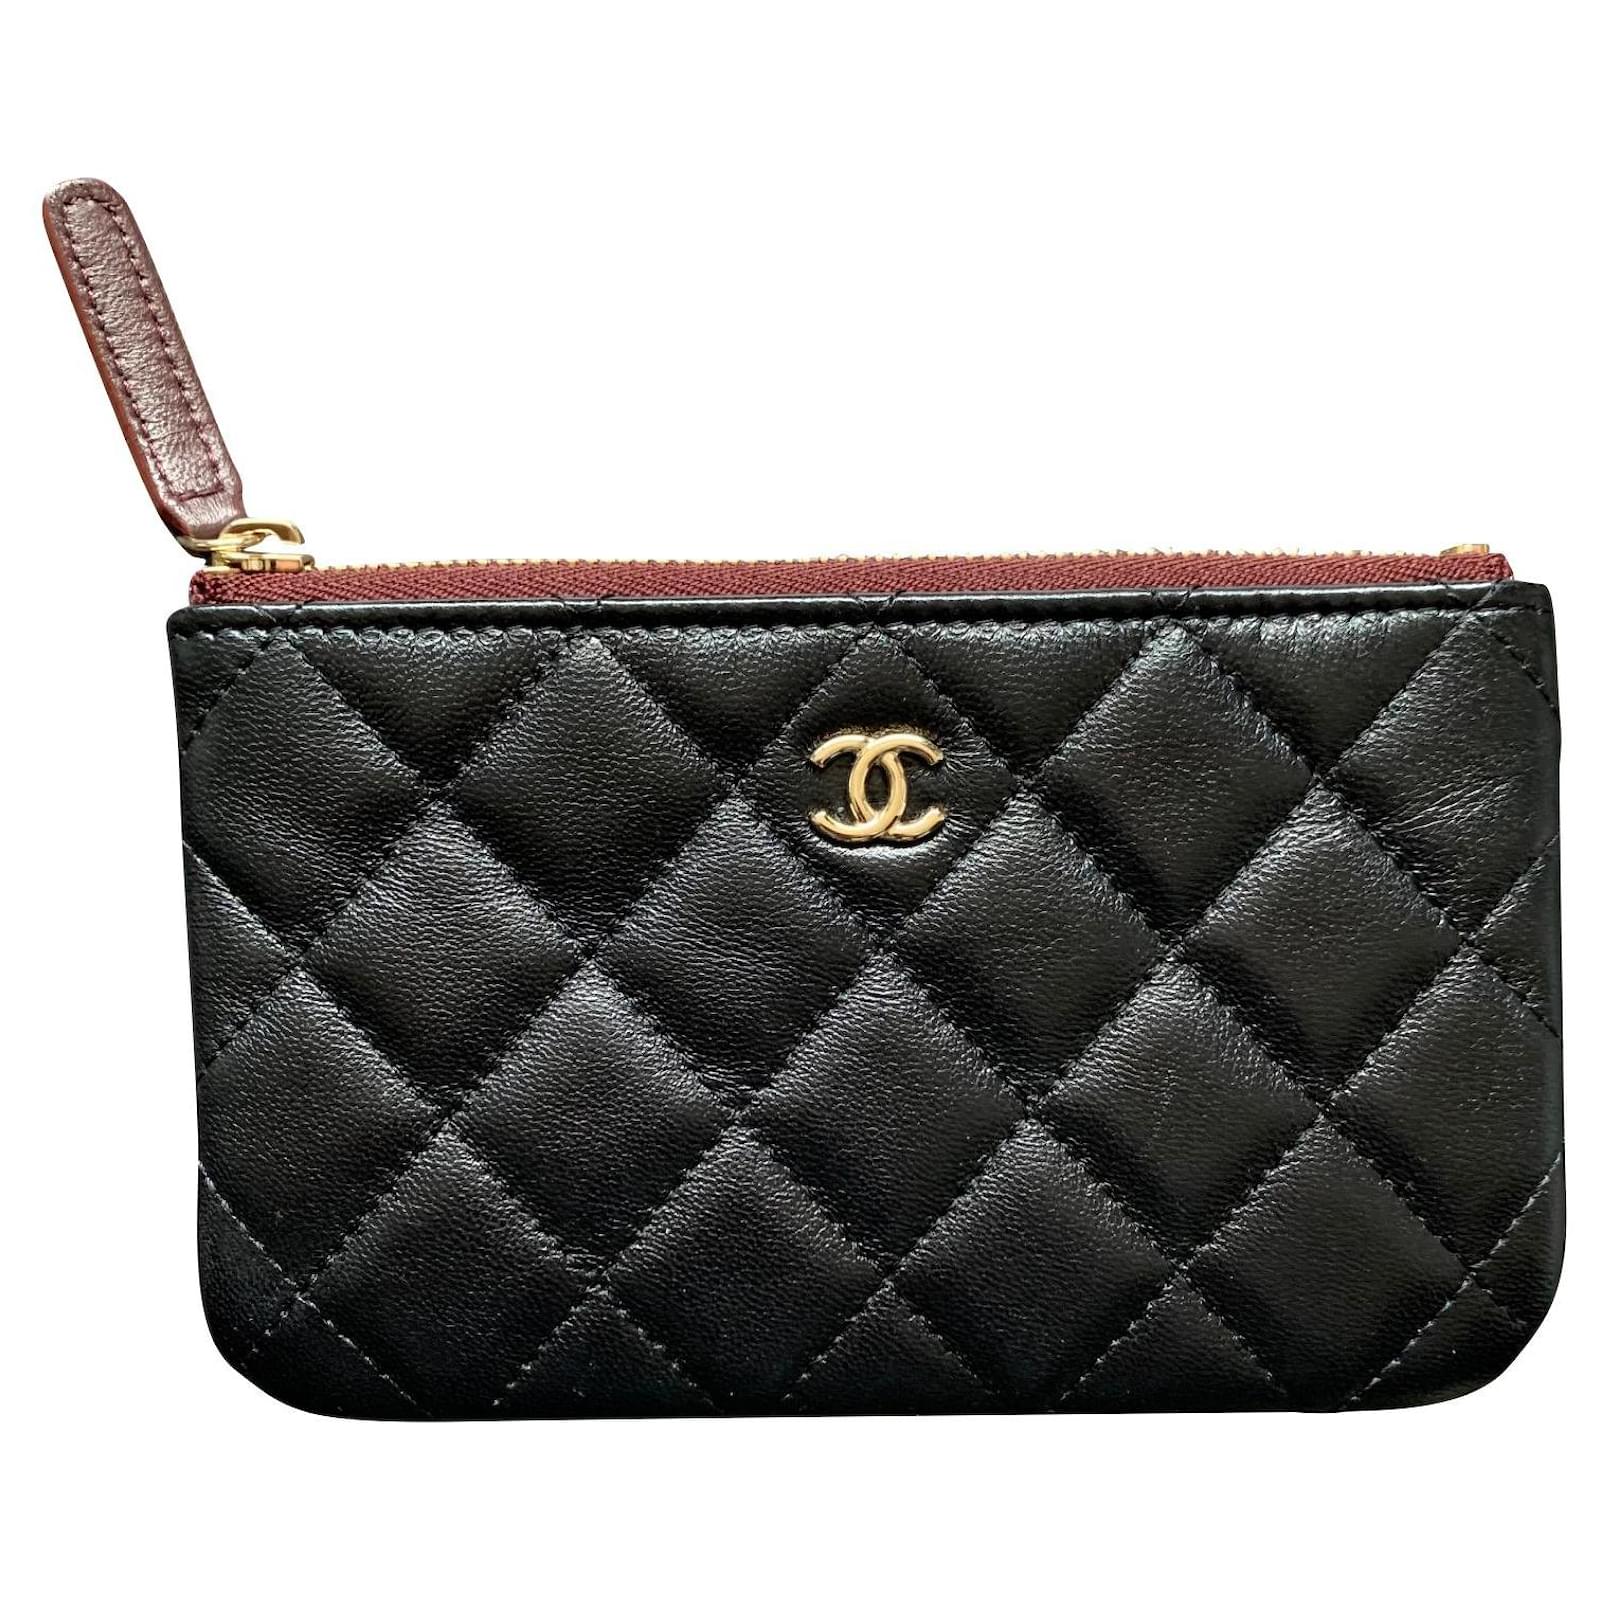 Purses, Wallets, Cases Chanel Chanel Card Holder - Collection 23S Sweet Heart